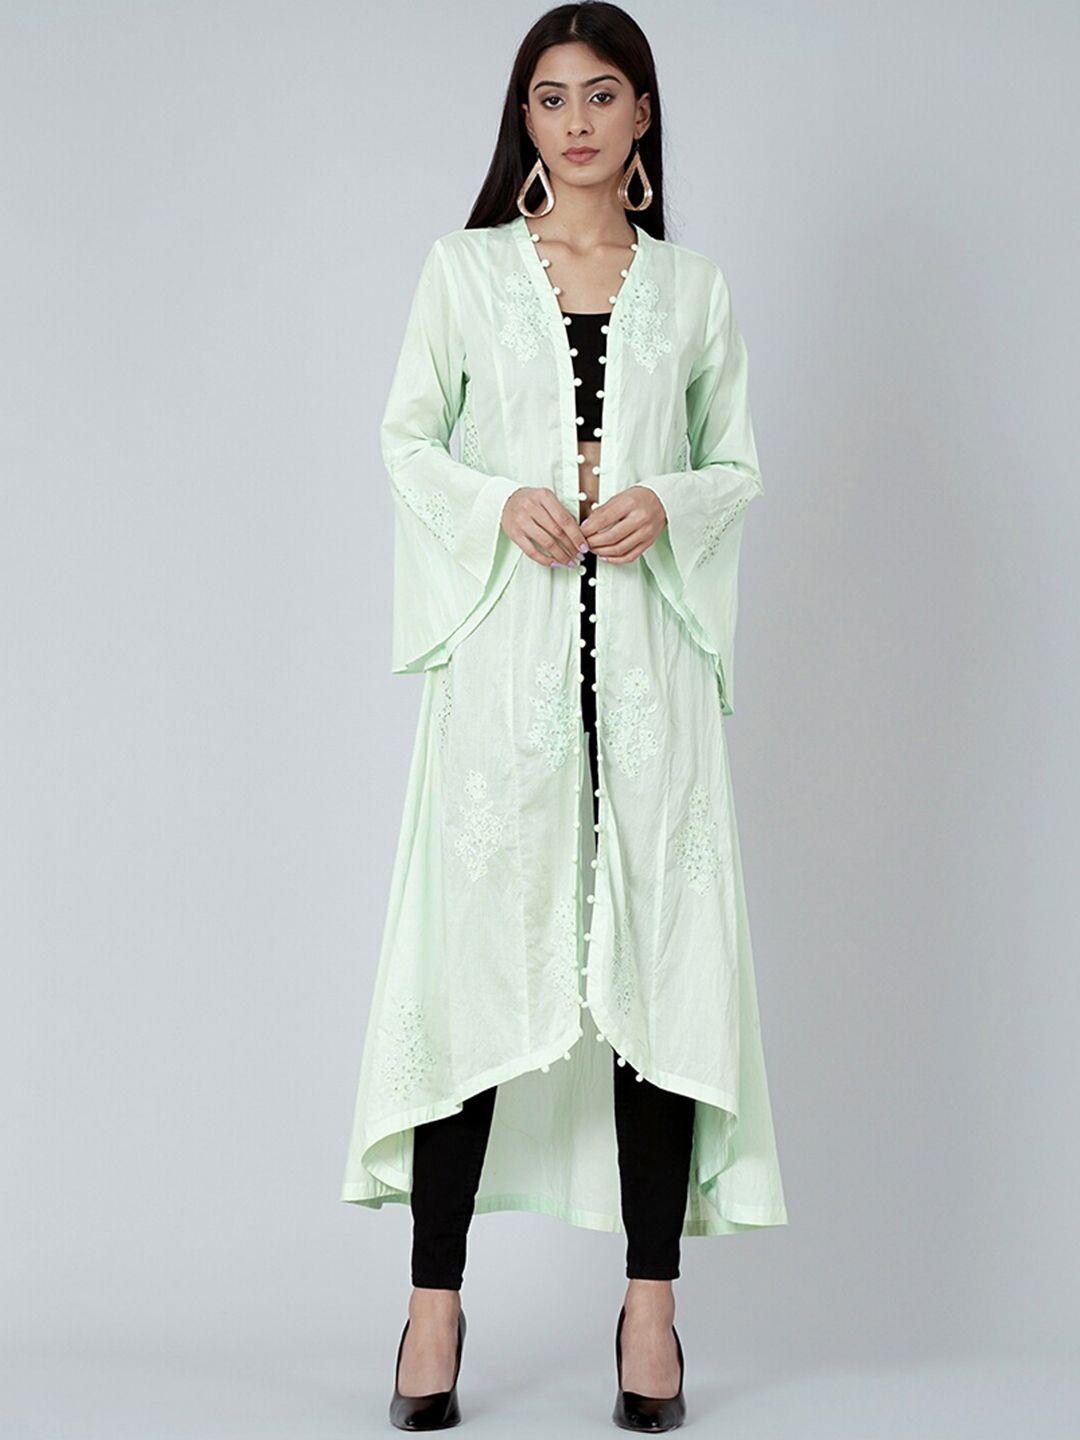 first resort by ramola bachchan embroidered high-low cotton longline shrug